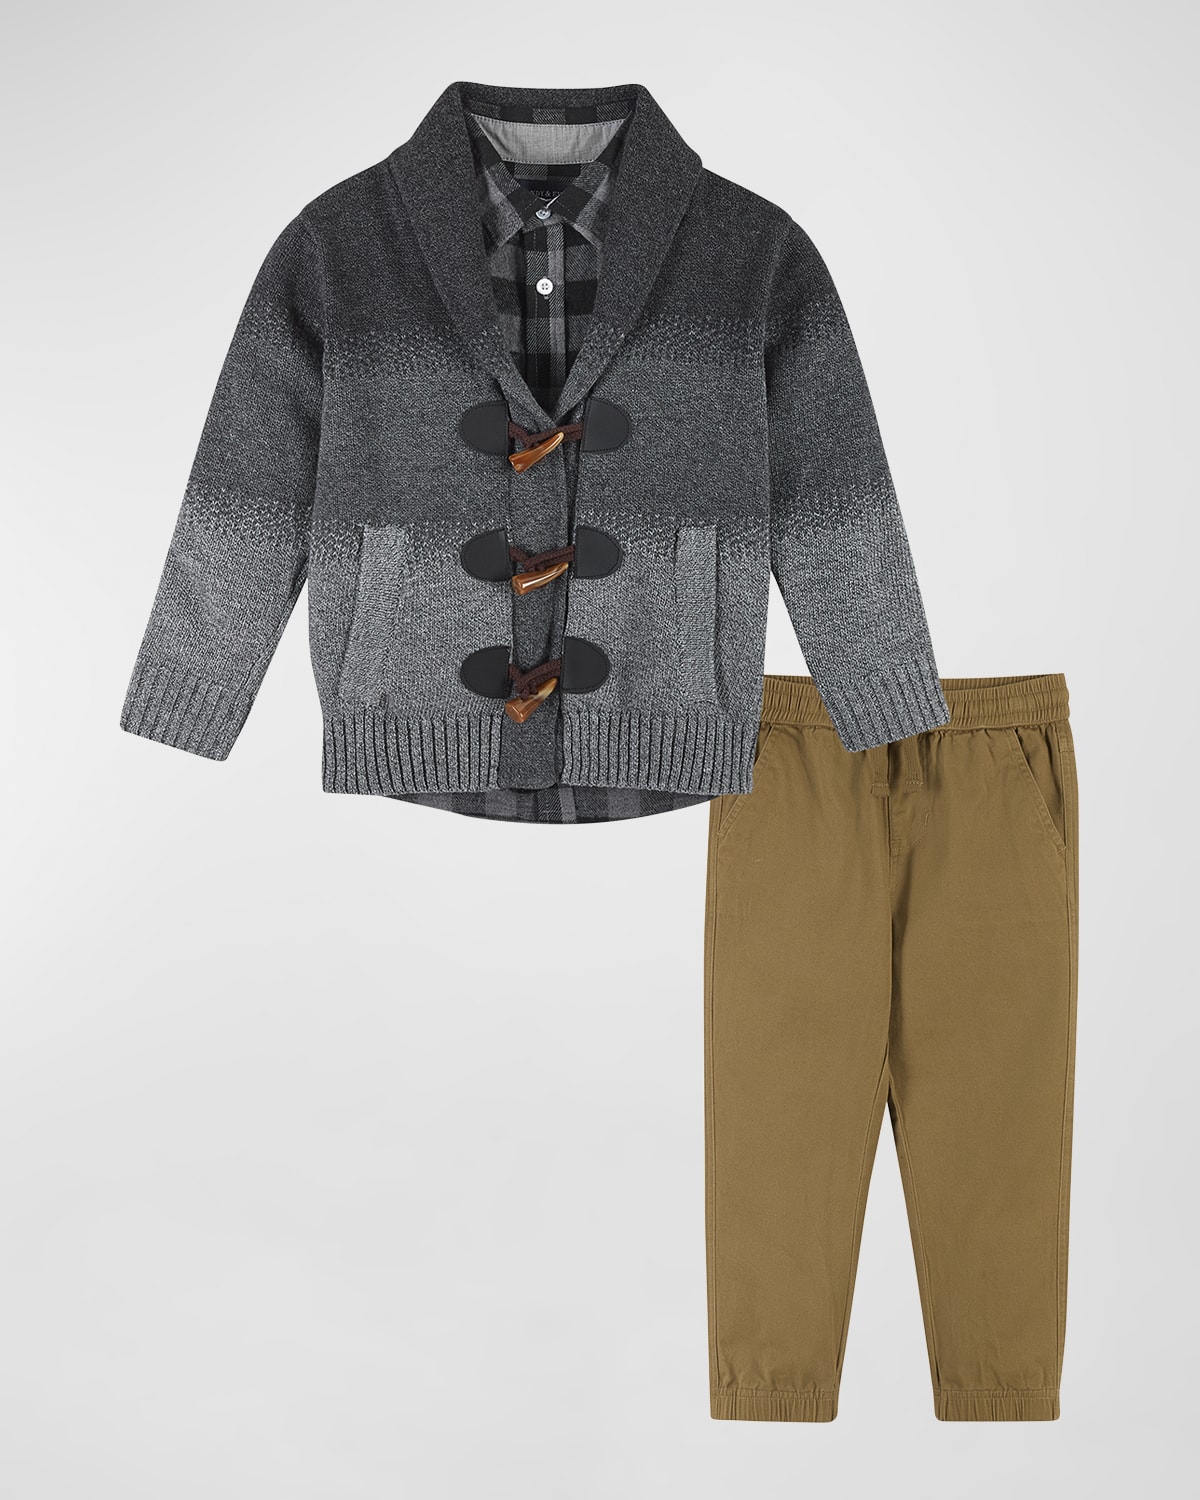 Andy & Evan Kids' Boy's Toggle Cardigan W/ Button Down Shirt And Pants Set In Grey Ombre